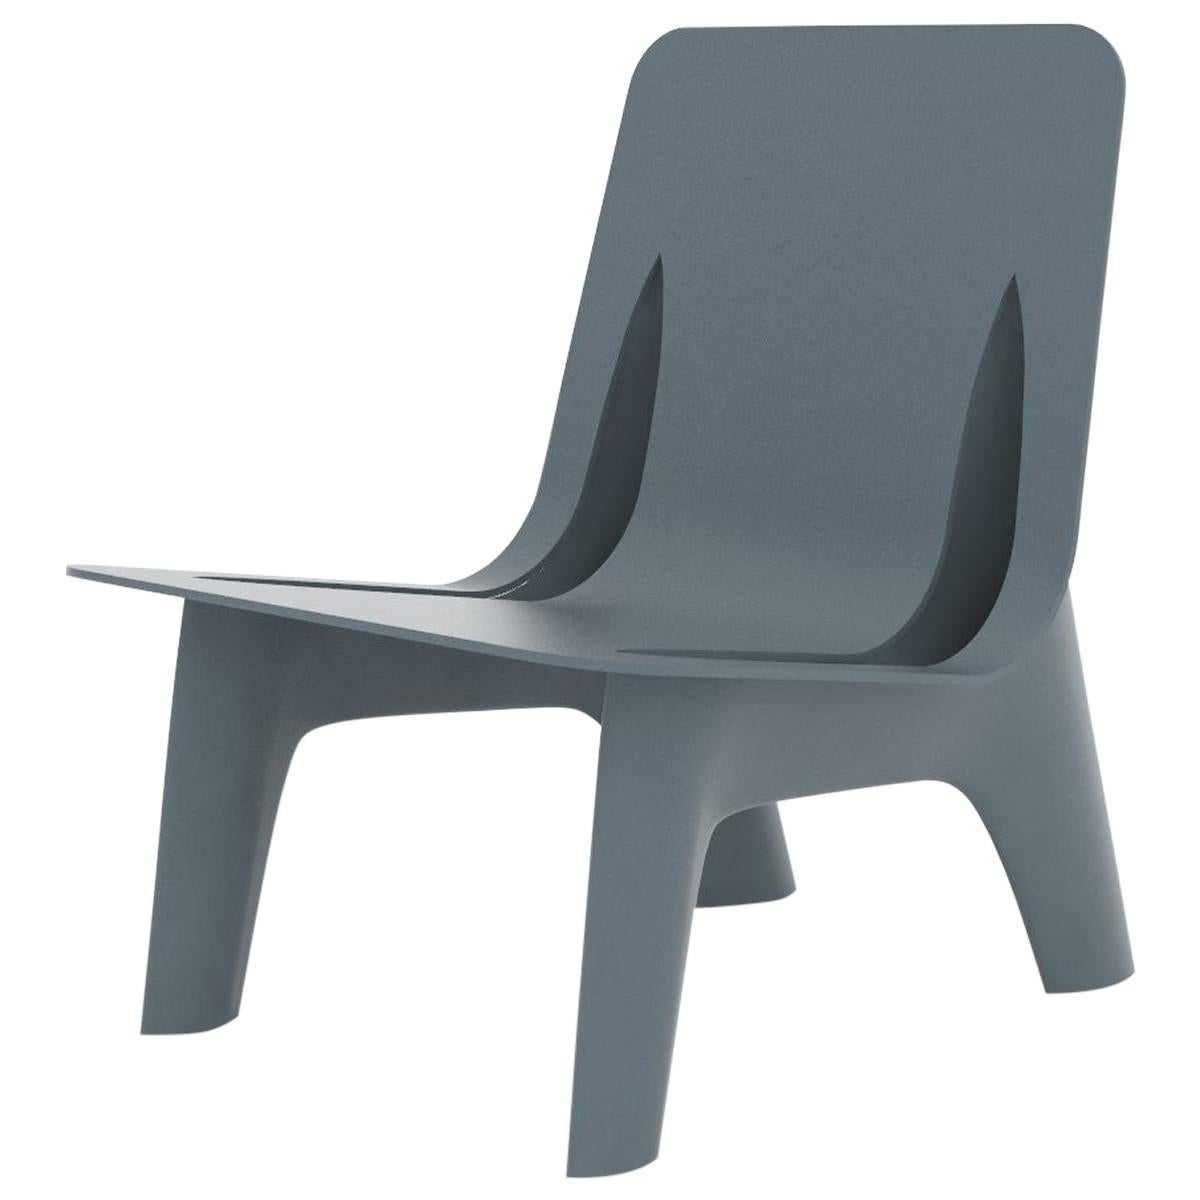 J-Chair Lounge Polished Grey Blue Color Aluminum Seating by Zieta For Sale